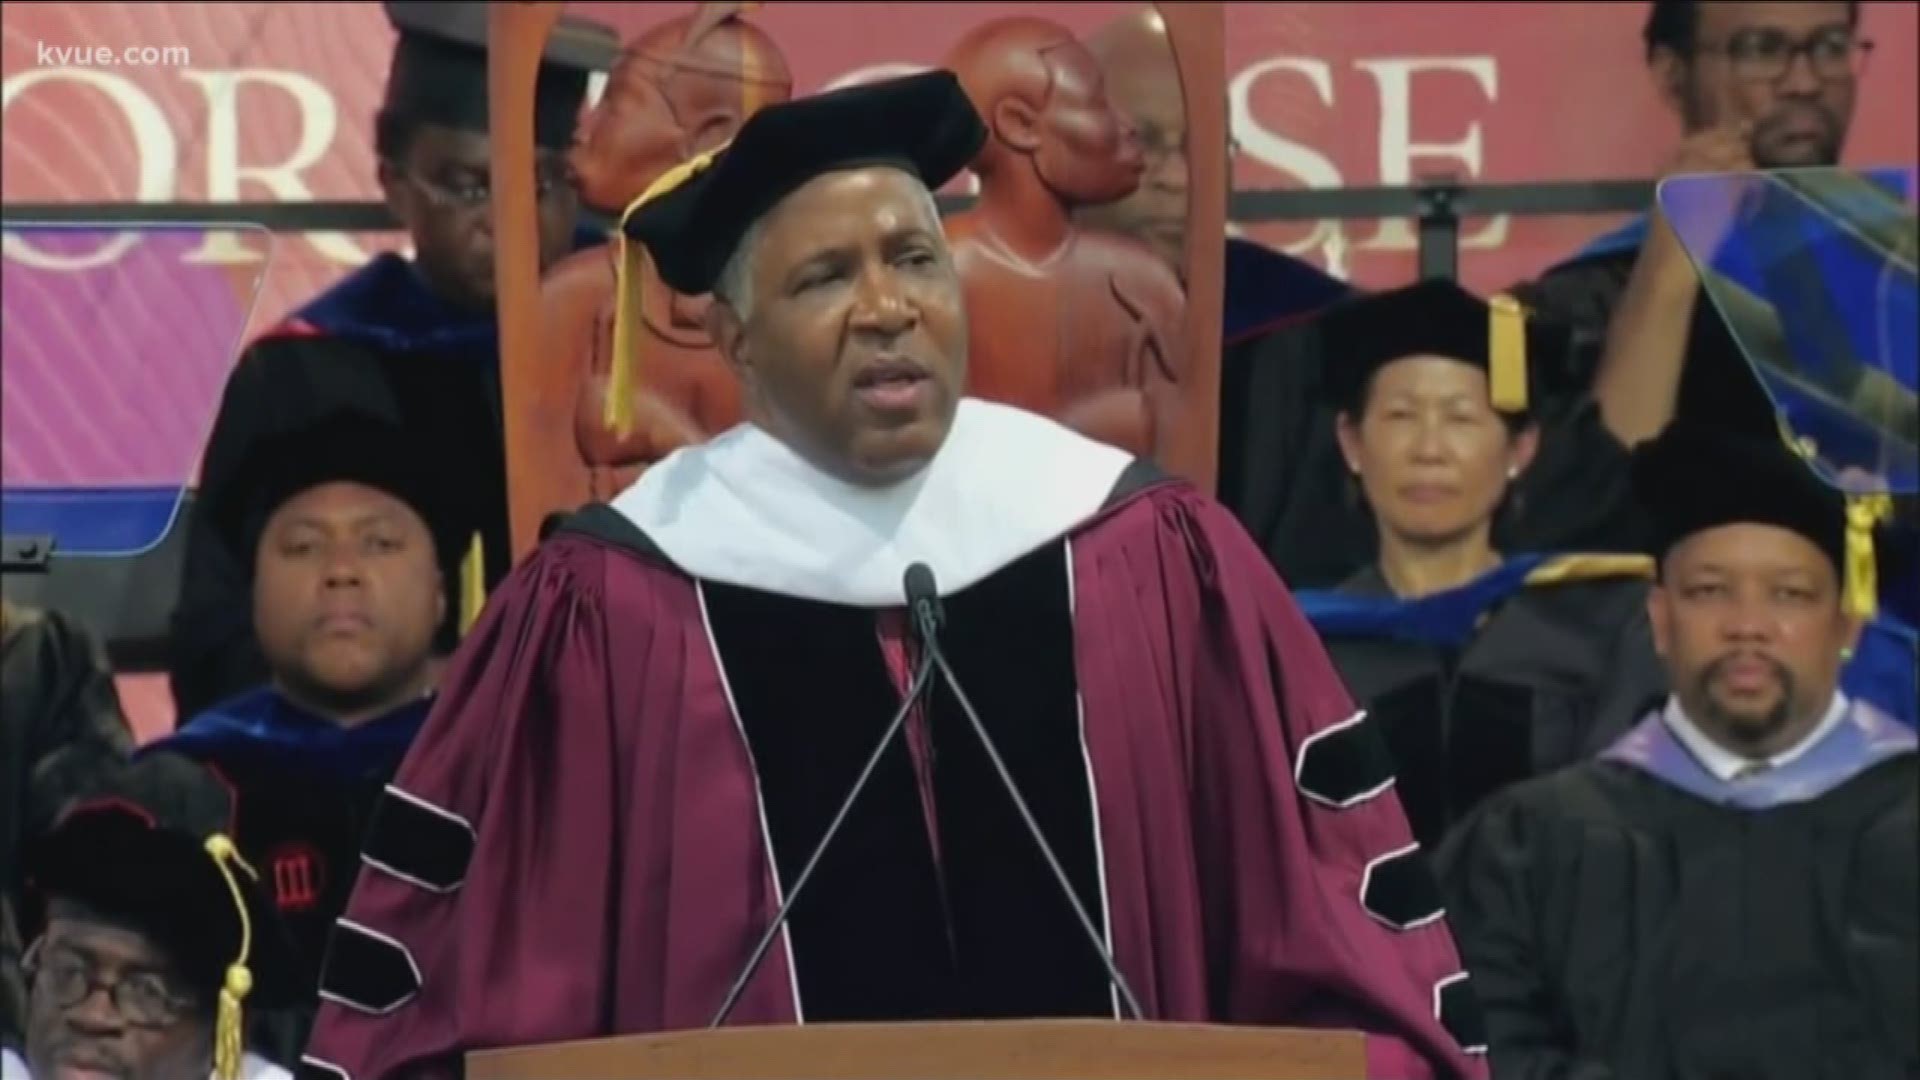 The Austin billionaire announced he will pay off all the student loan debt of 2019 Morehouse College graduates.